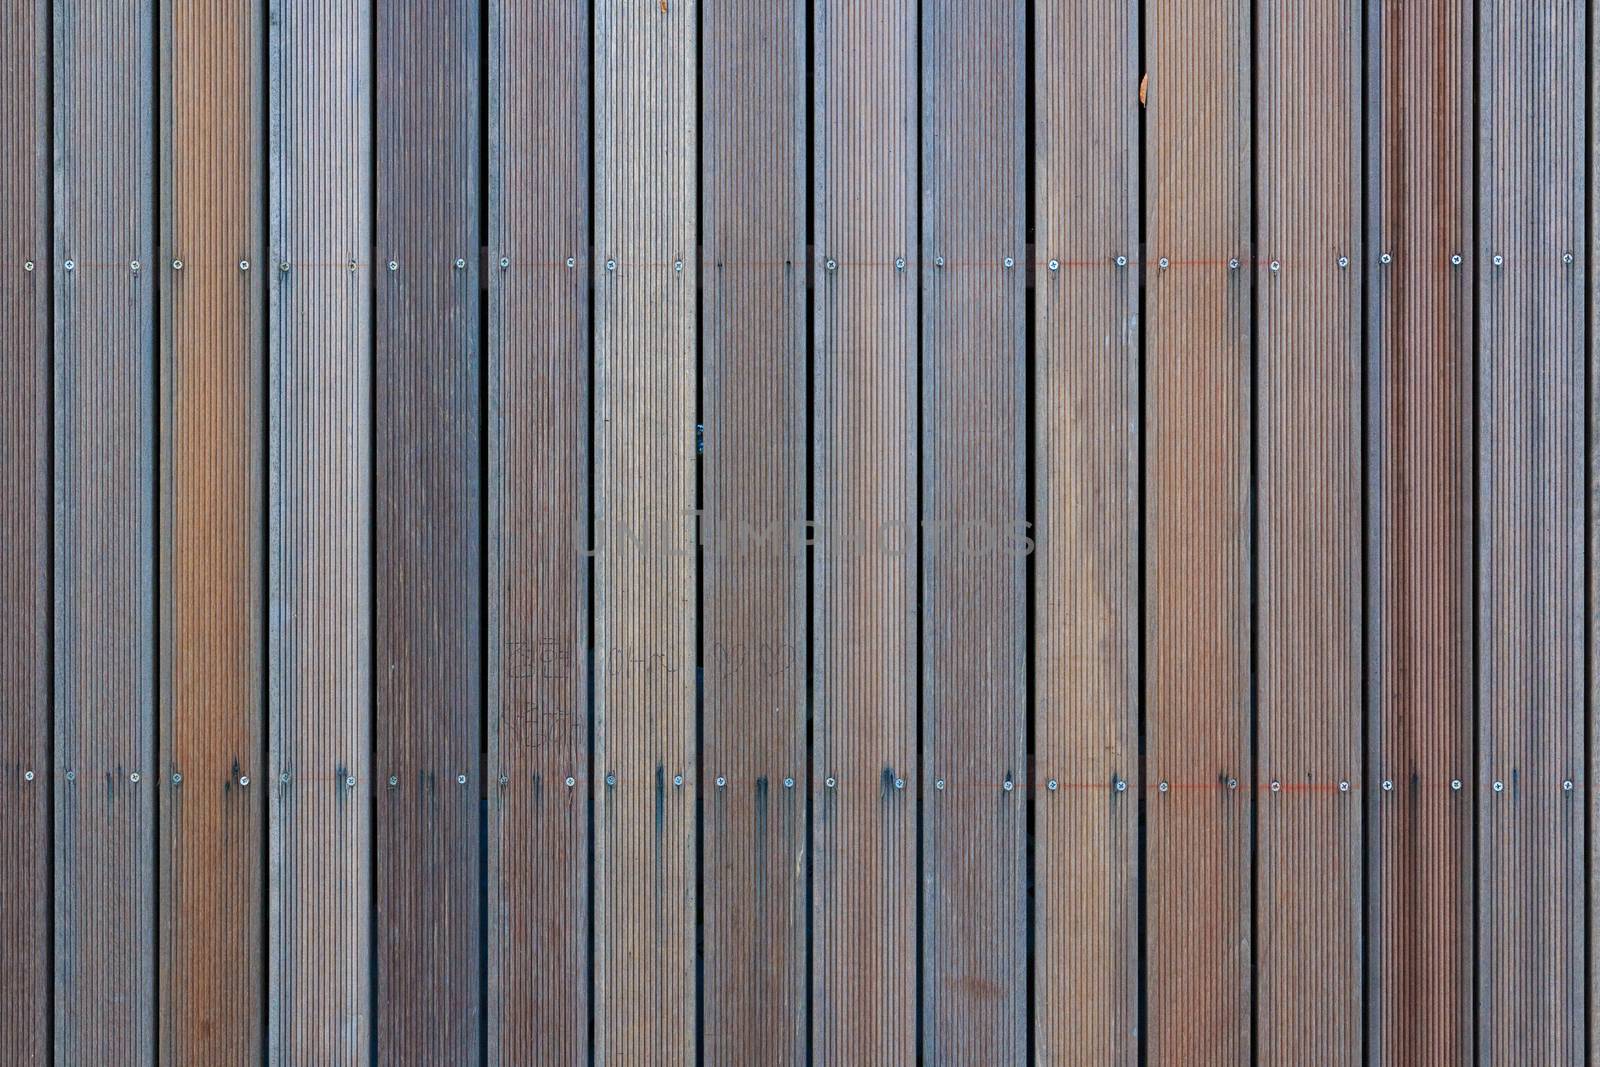 close up of wood planks texture background.